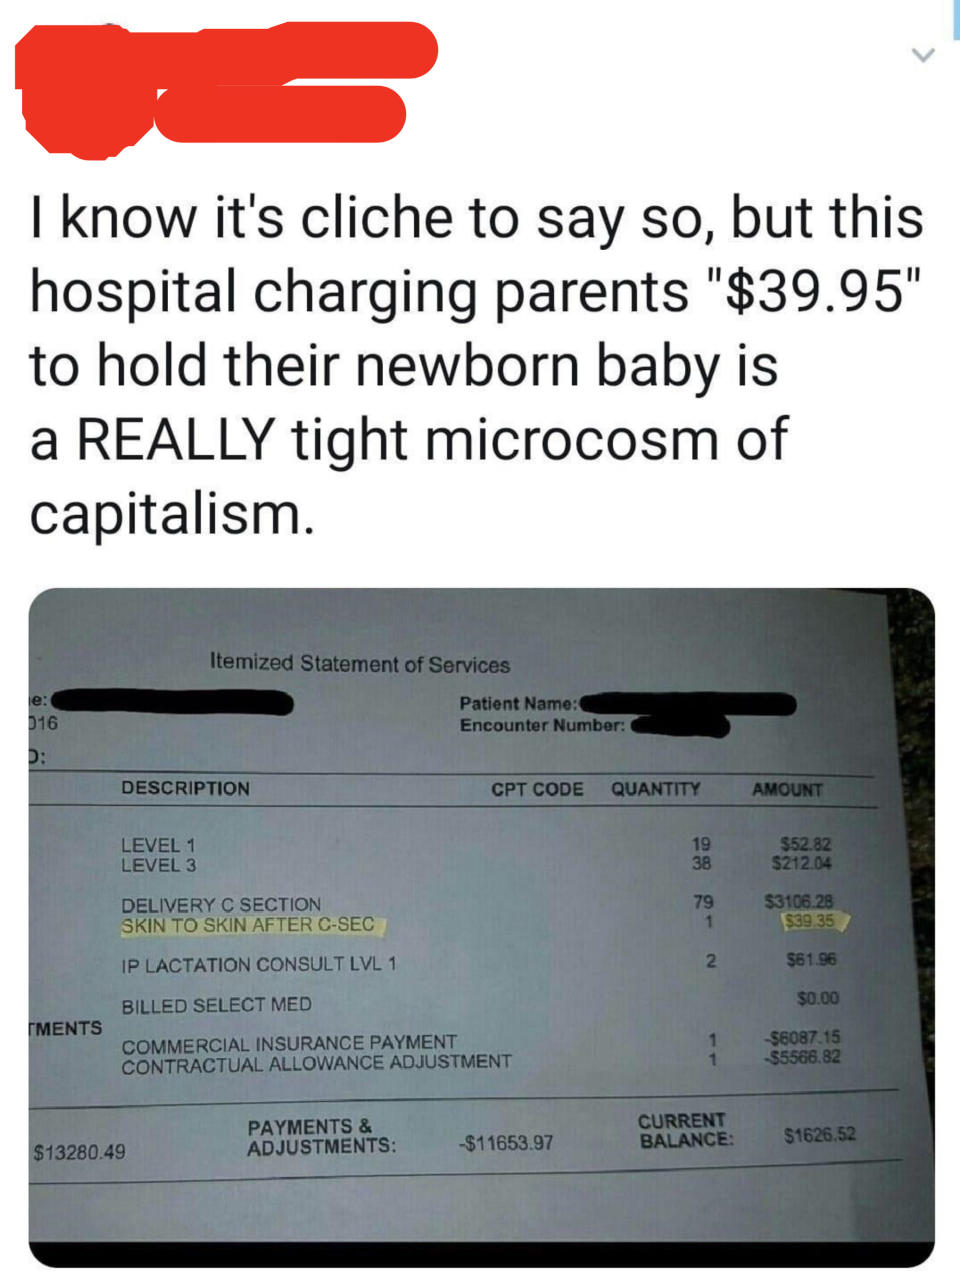 Tweet: "I know it's cliche to say so, but this hospital charging patients $39.95 to hold their newborn baby is a REALLY tight microcosm of capitalism" with a bill with a $39.35 charge for "Skin to skin after C-section"